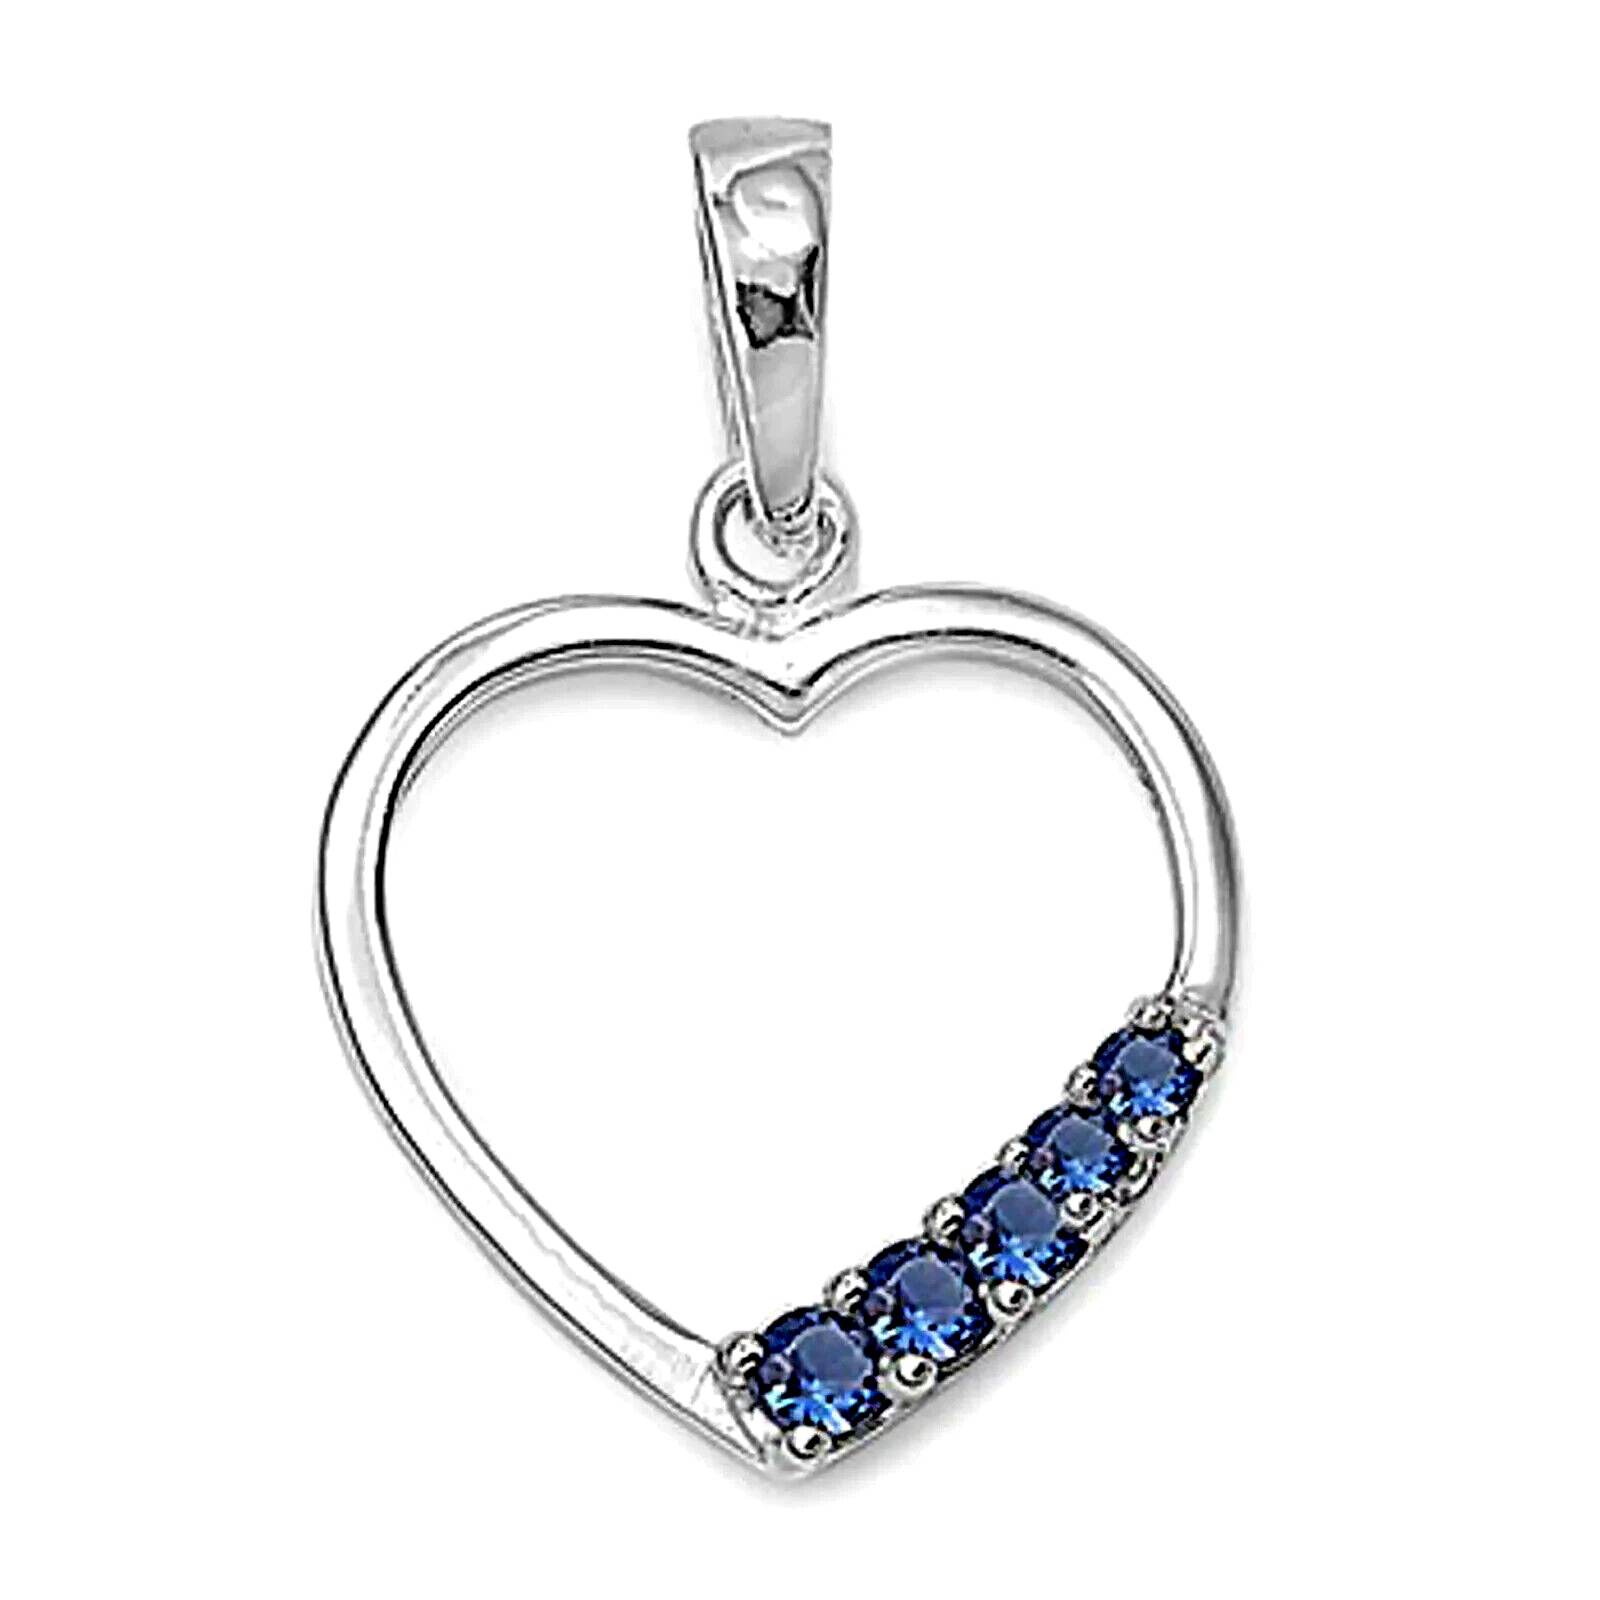 Beautiful Blue Sapphire Heart Pendant set in Solid Sterling Silver w/chain